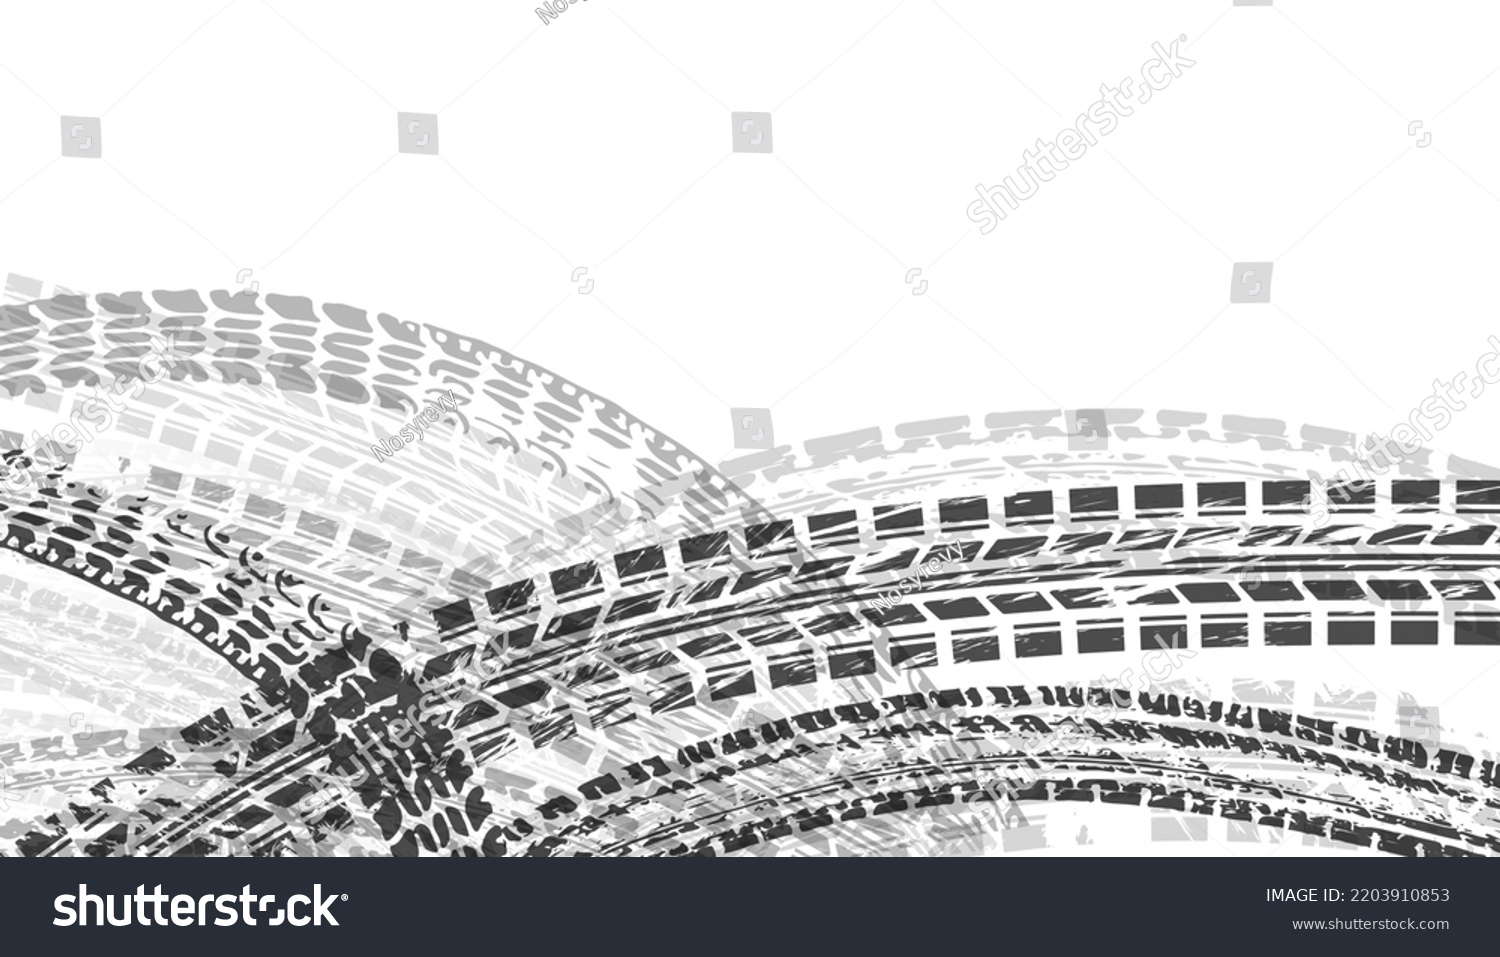 Background with tire wheel marks of cars. Vector illustration #2203910853